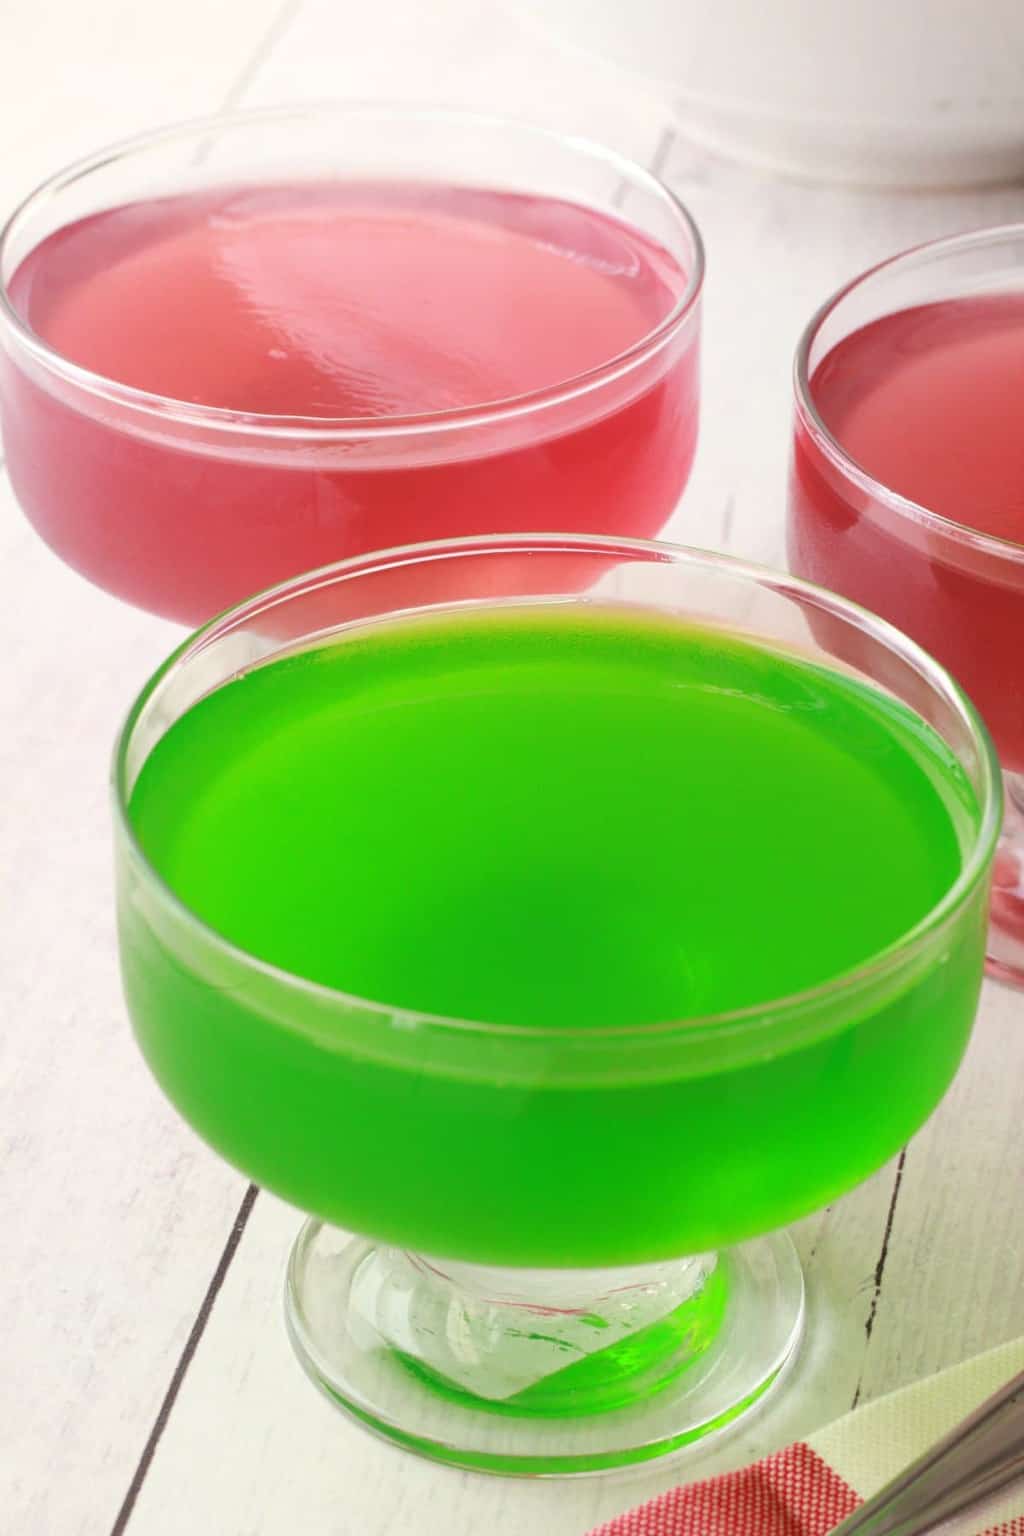 Red and green vegan jello in glass dishes.